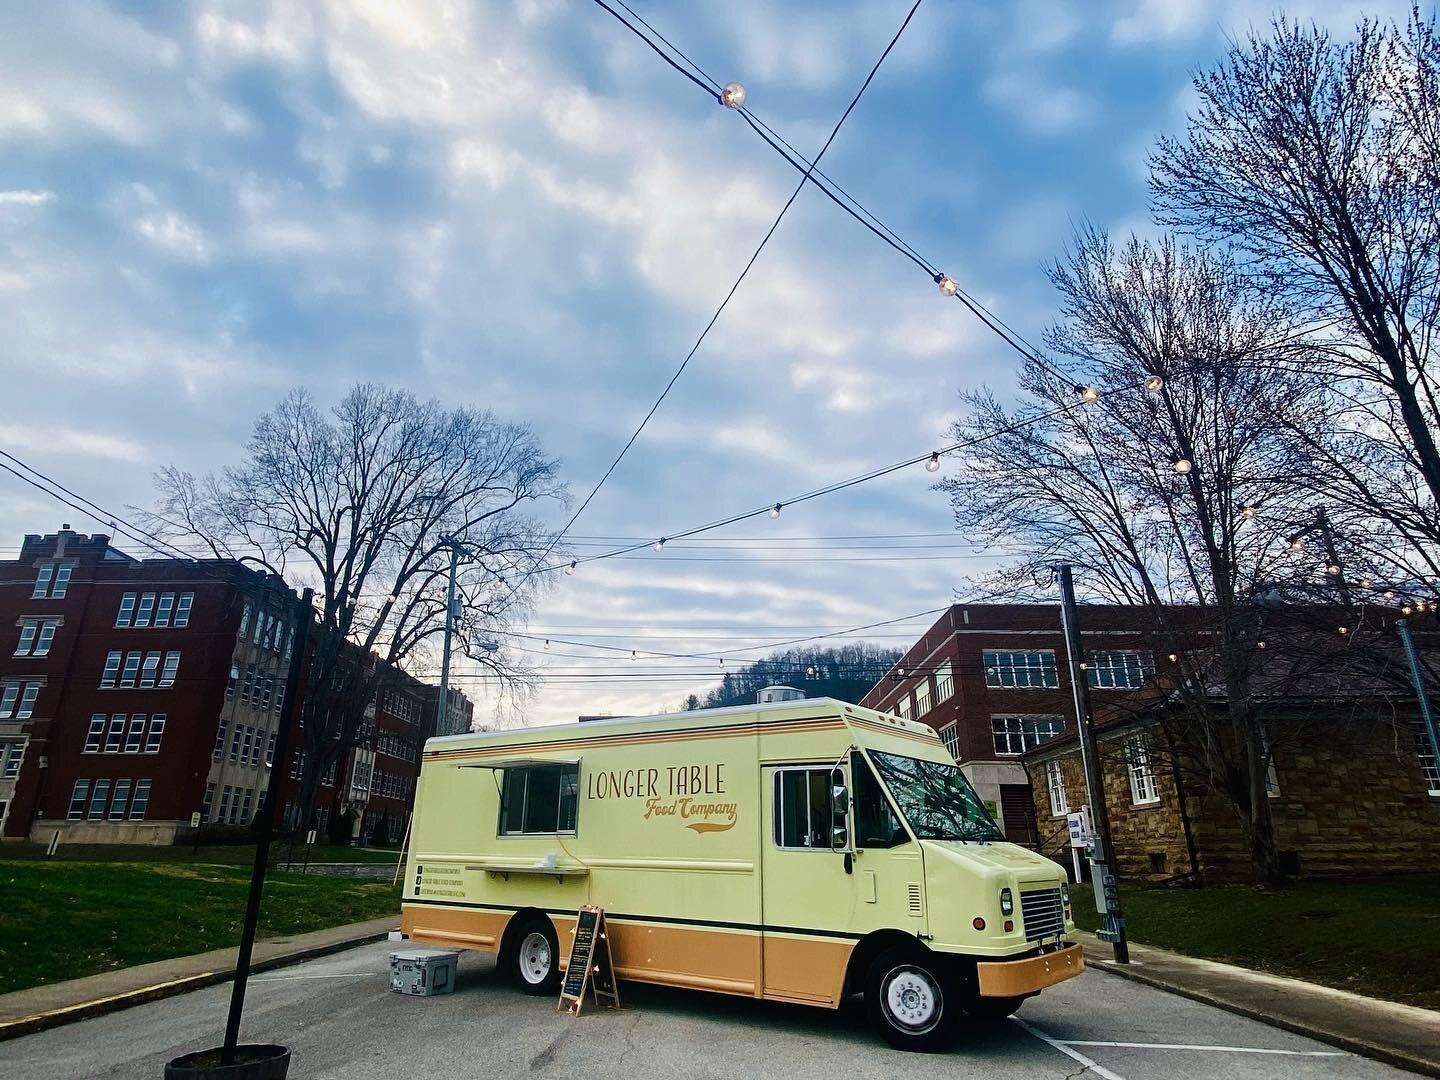 🌼happy first week of April! We&rsquo;ve got two dinners set ups and two lunch set ups for y&rsquo;all this week.🌼 we can&rsquo;t wait to see you! 

Tuesday- HVAC Outlet (Mount Sterling) 11am-1:30pm
Wednesday- Sawstone Brewery (Morehead) 5:30pm-8:00